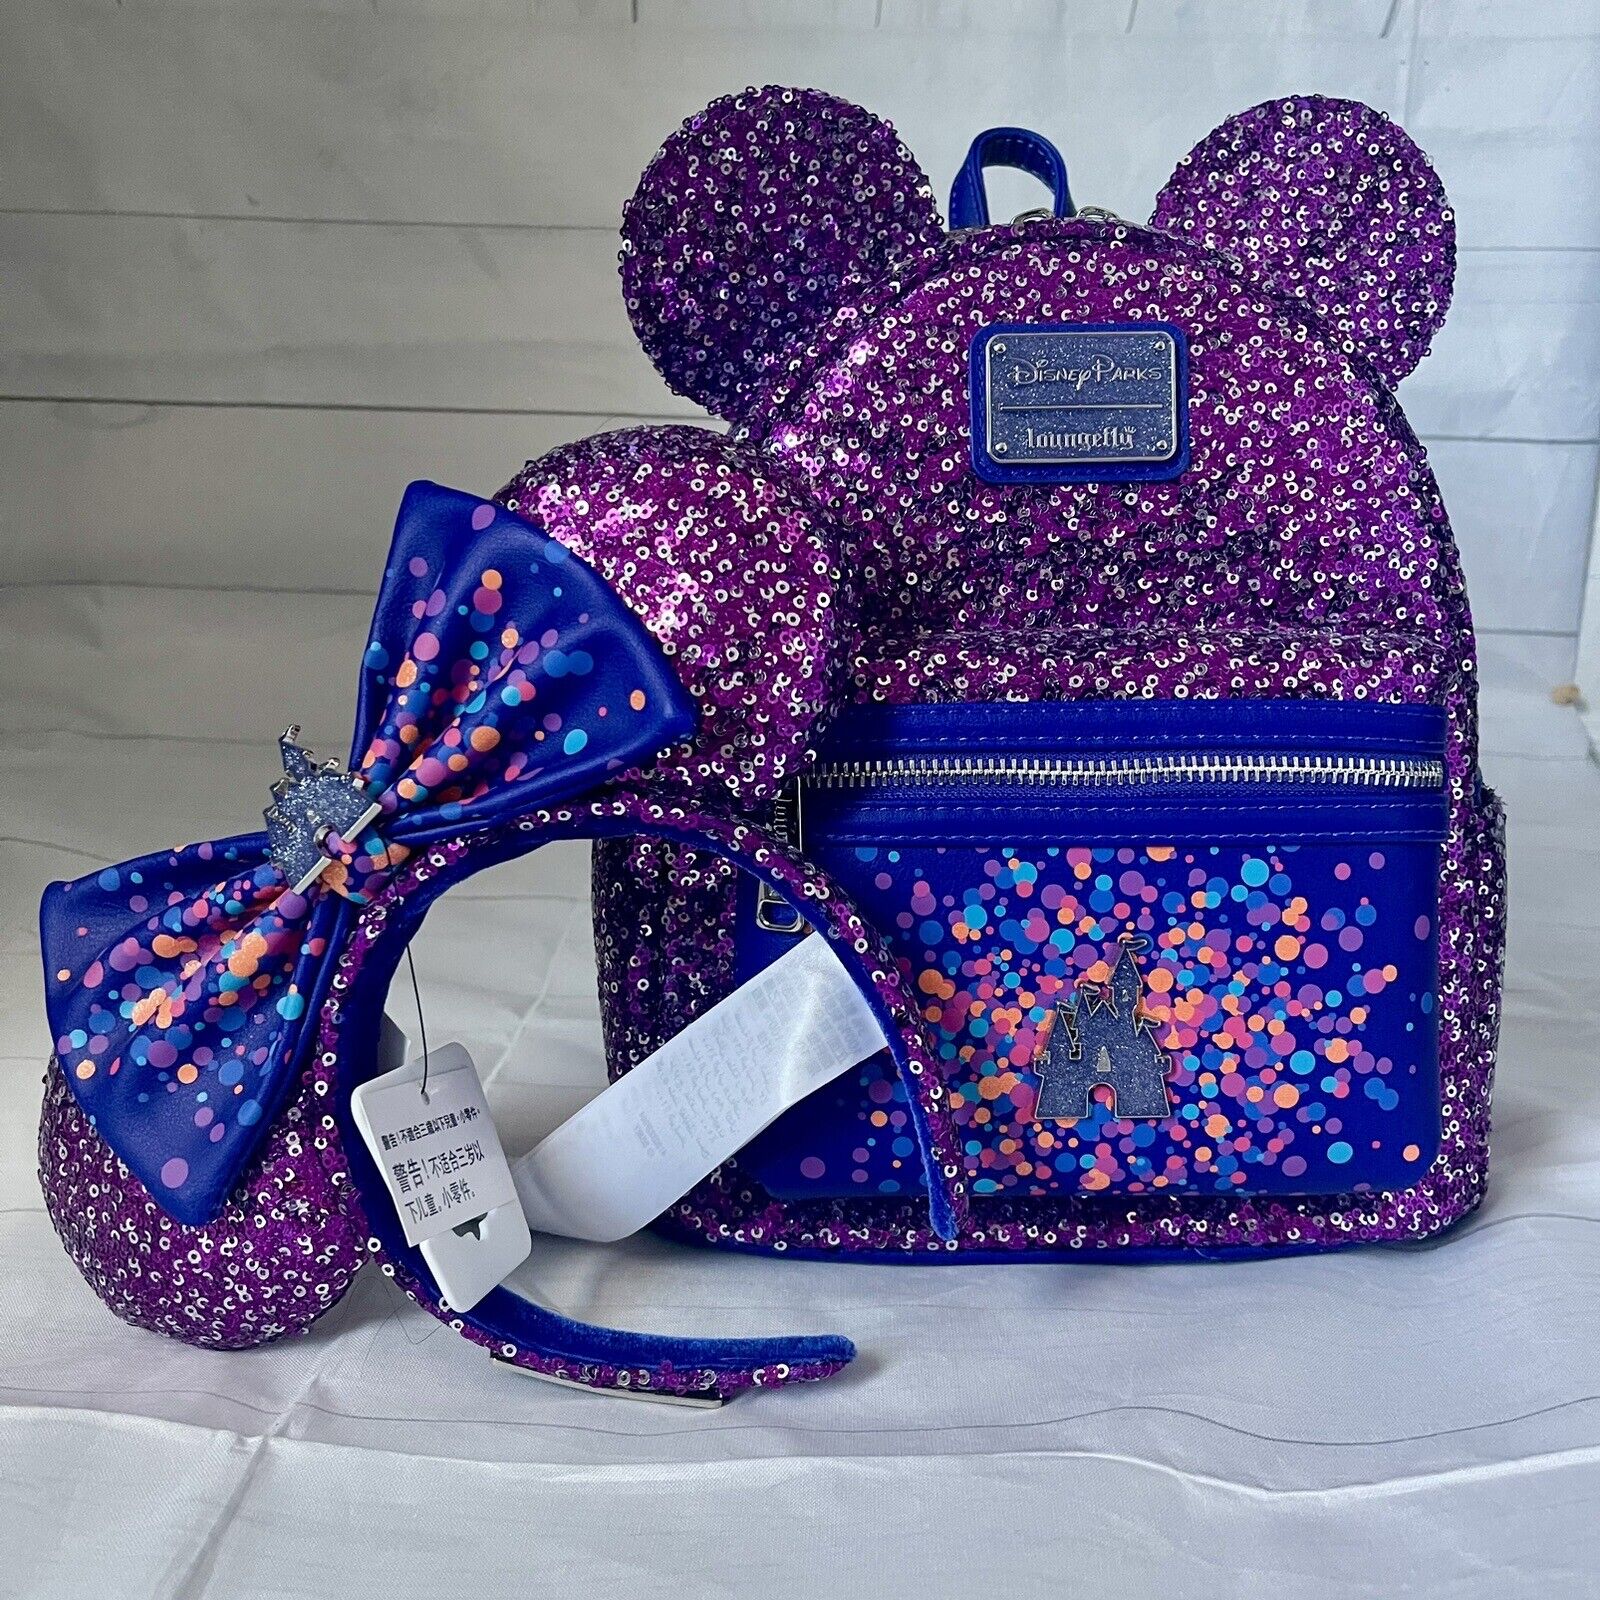 2022 Disney Parks Loungefly Purple Sequin Sparkling Castle Backpack & Ears NWT